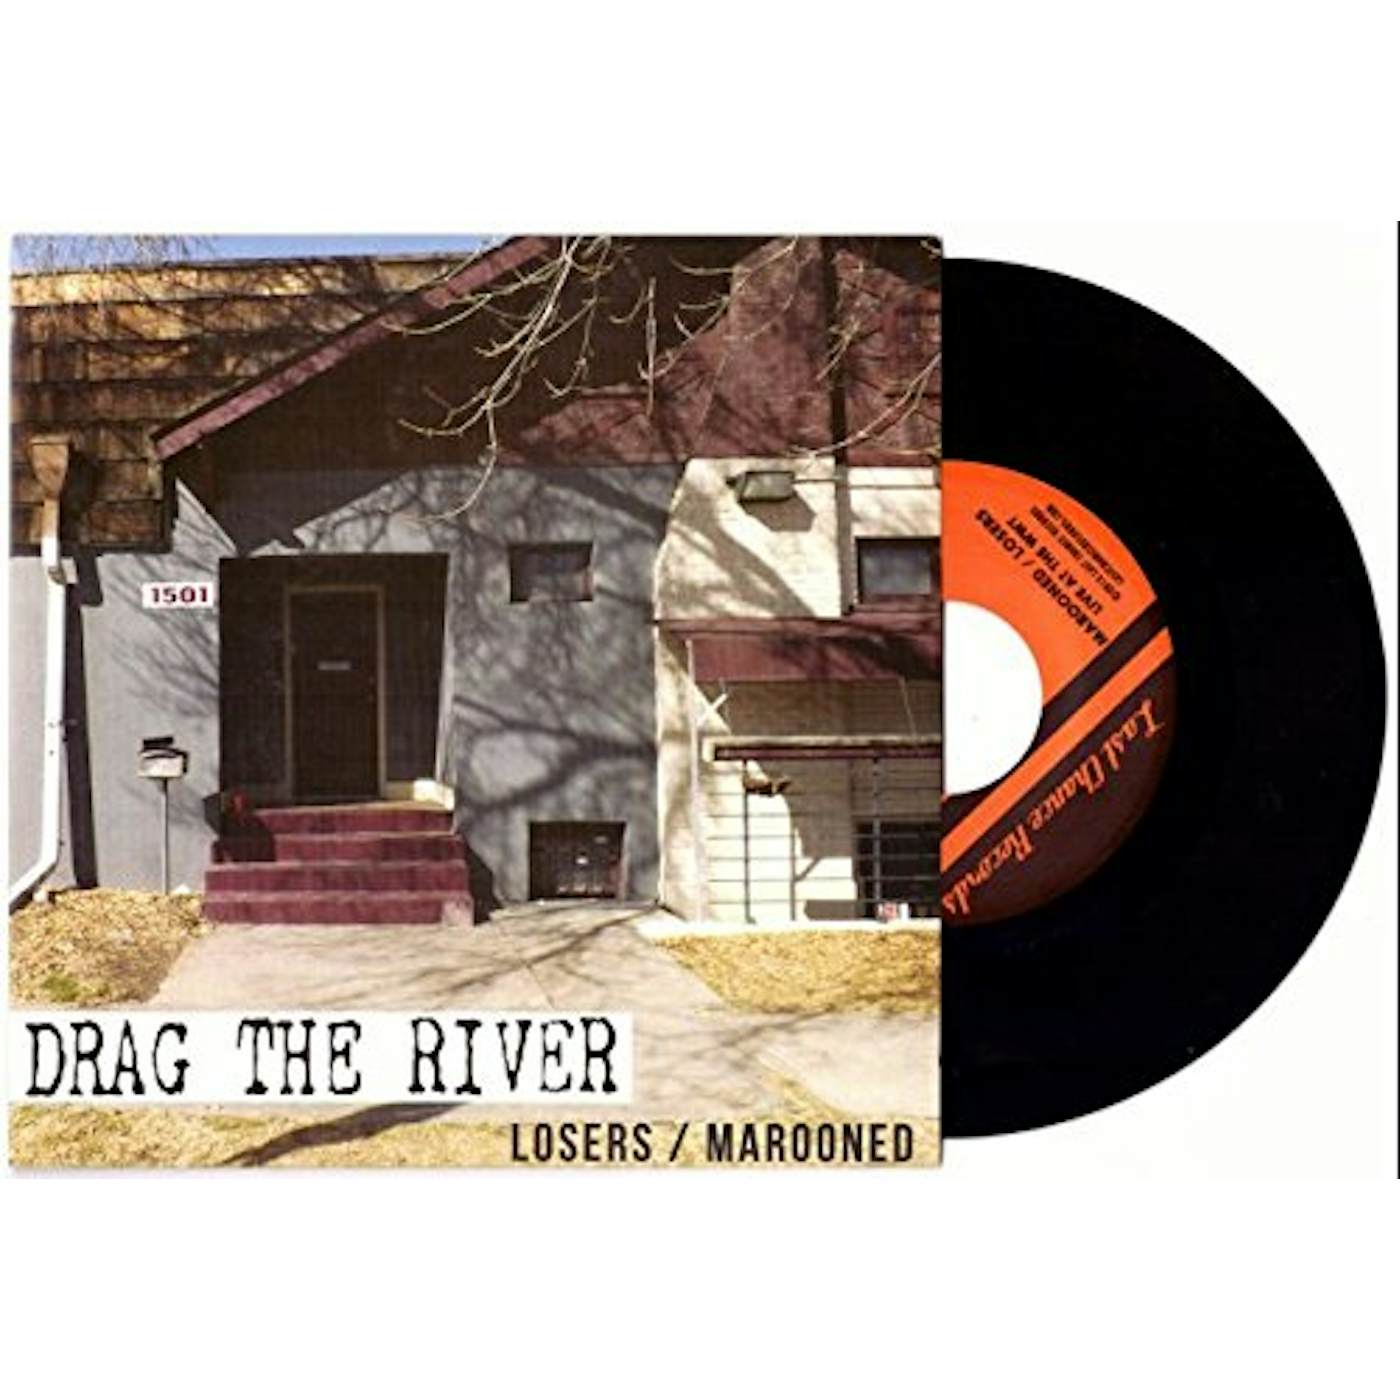 Drag The River Losers / Marooned Vinyl Record